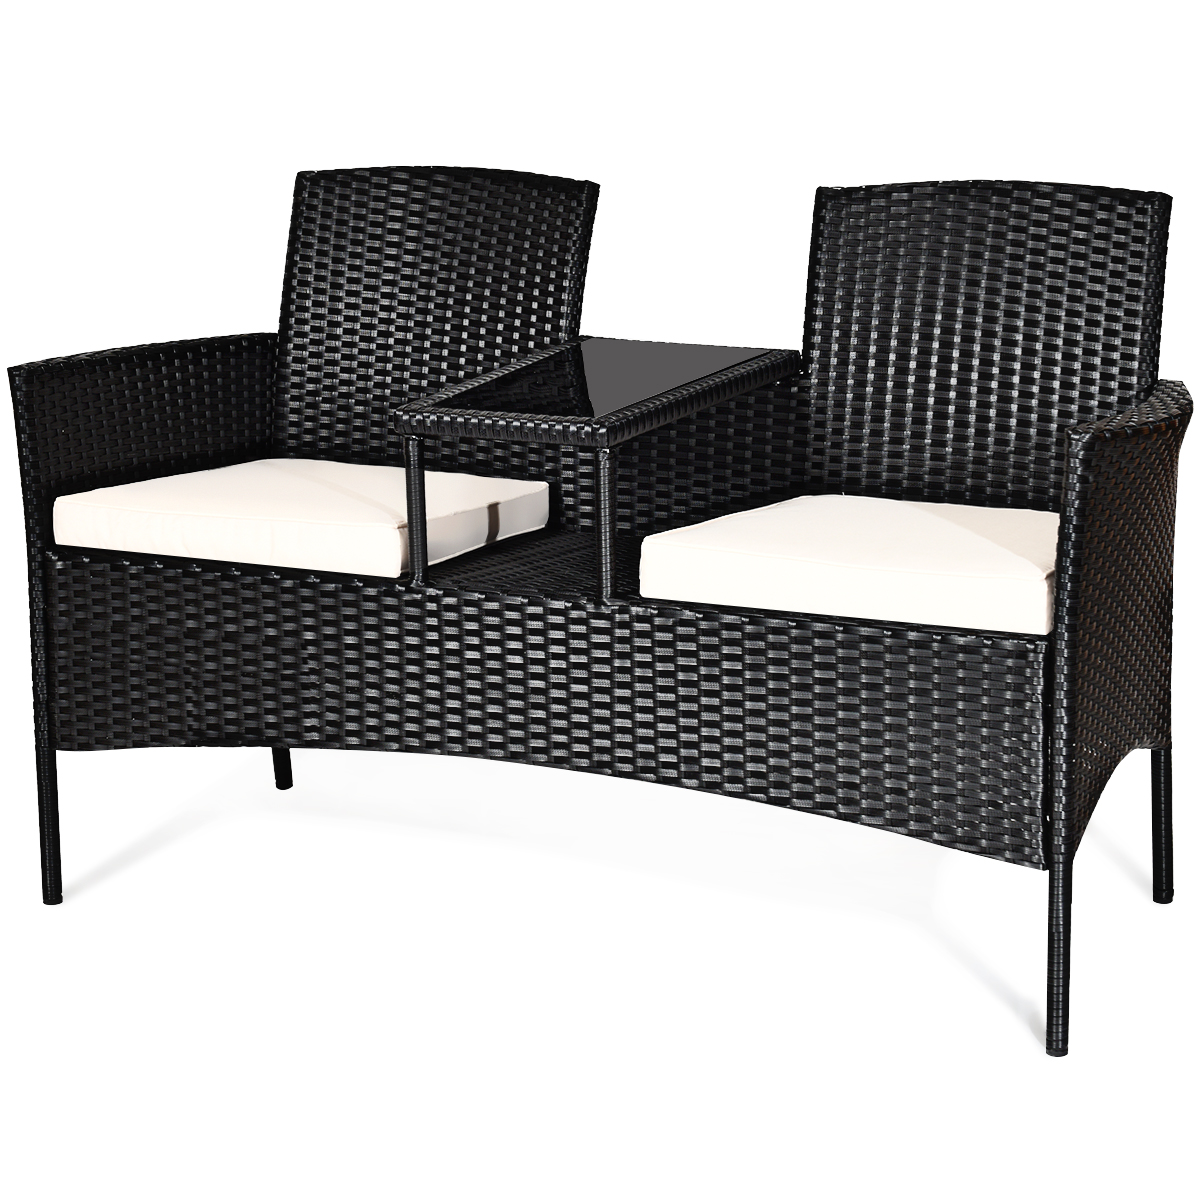 Costway Patio Rattan Conversation Set Seat Sofa Cushioned Loveseat Glass Table Chairs - image 4 of 8